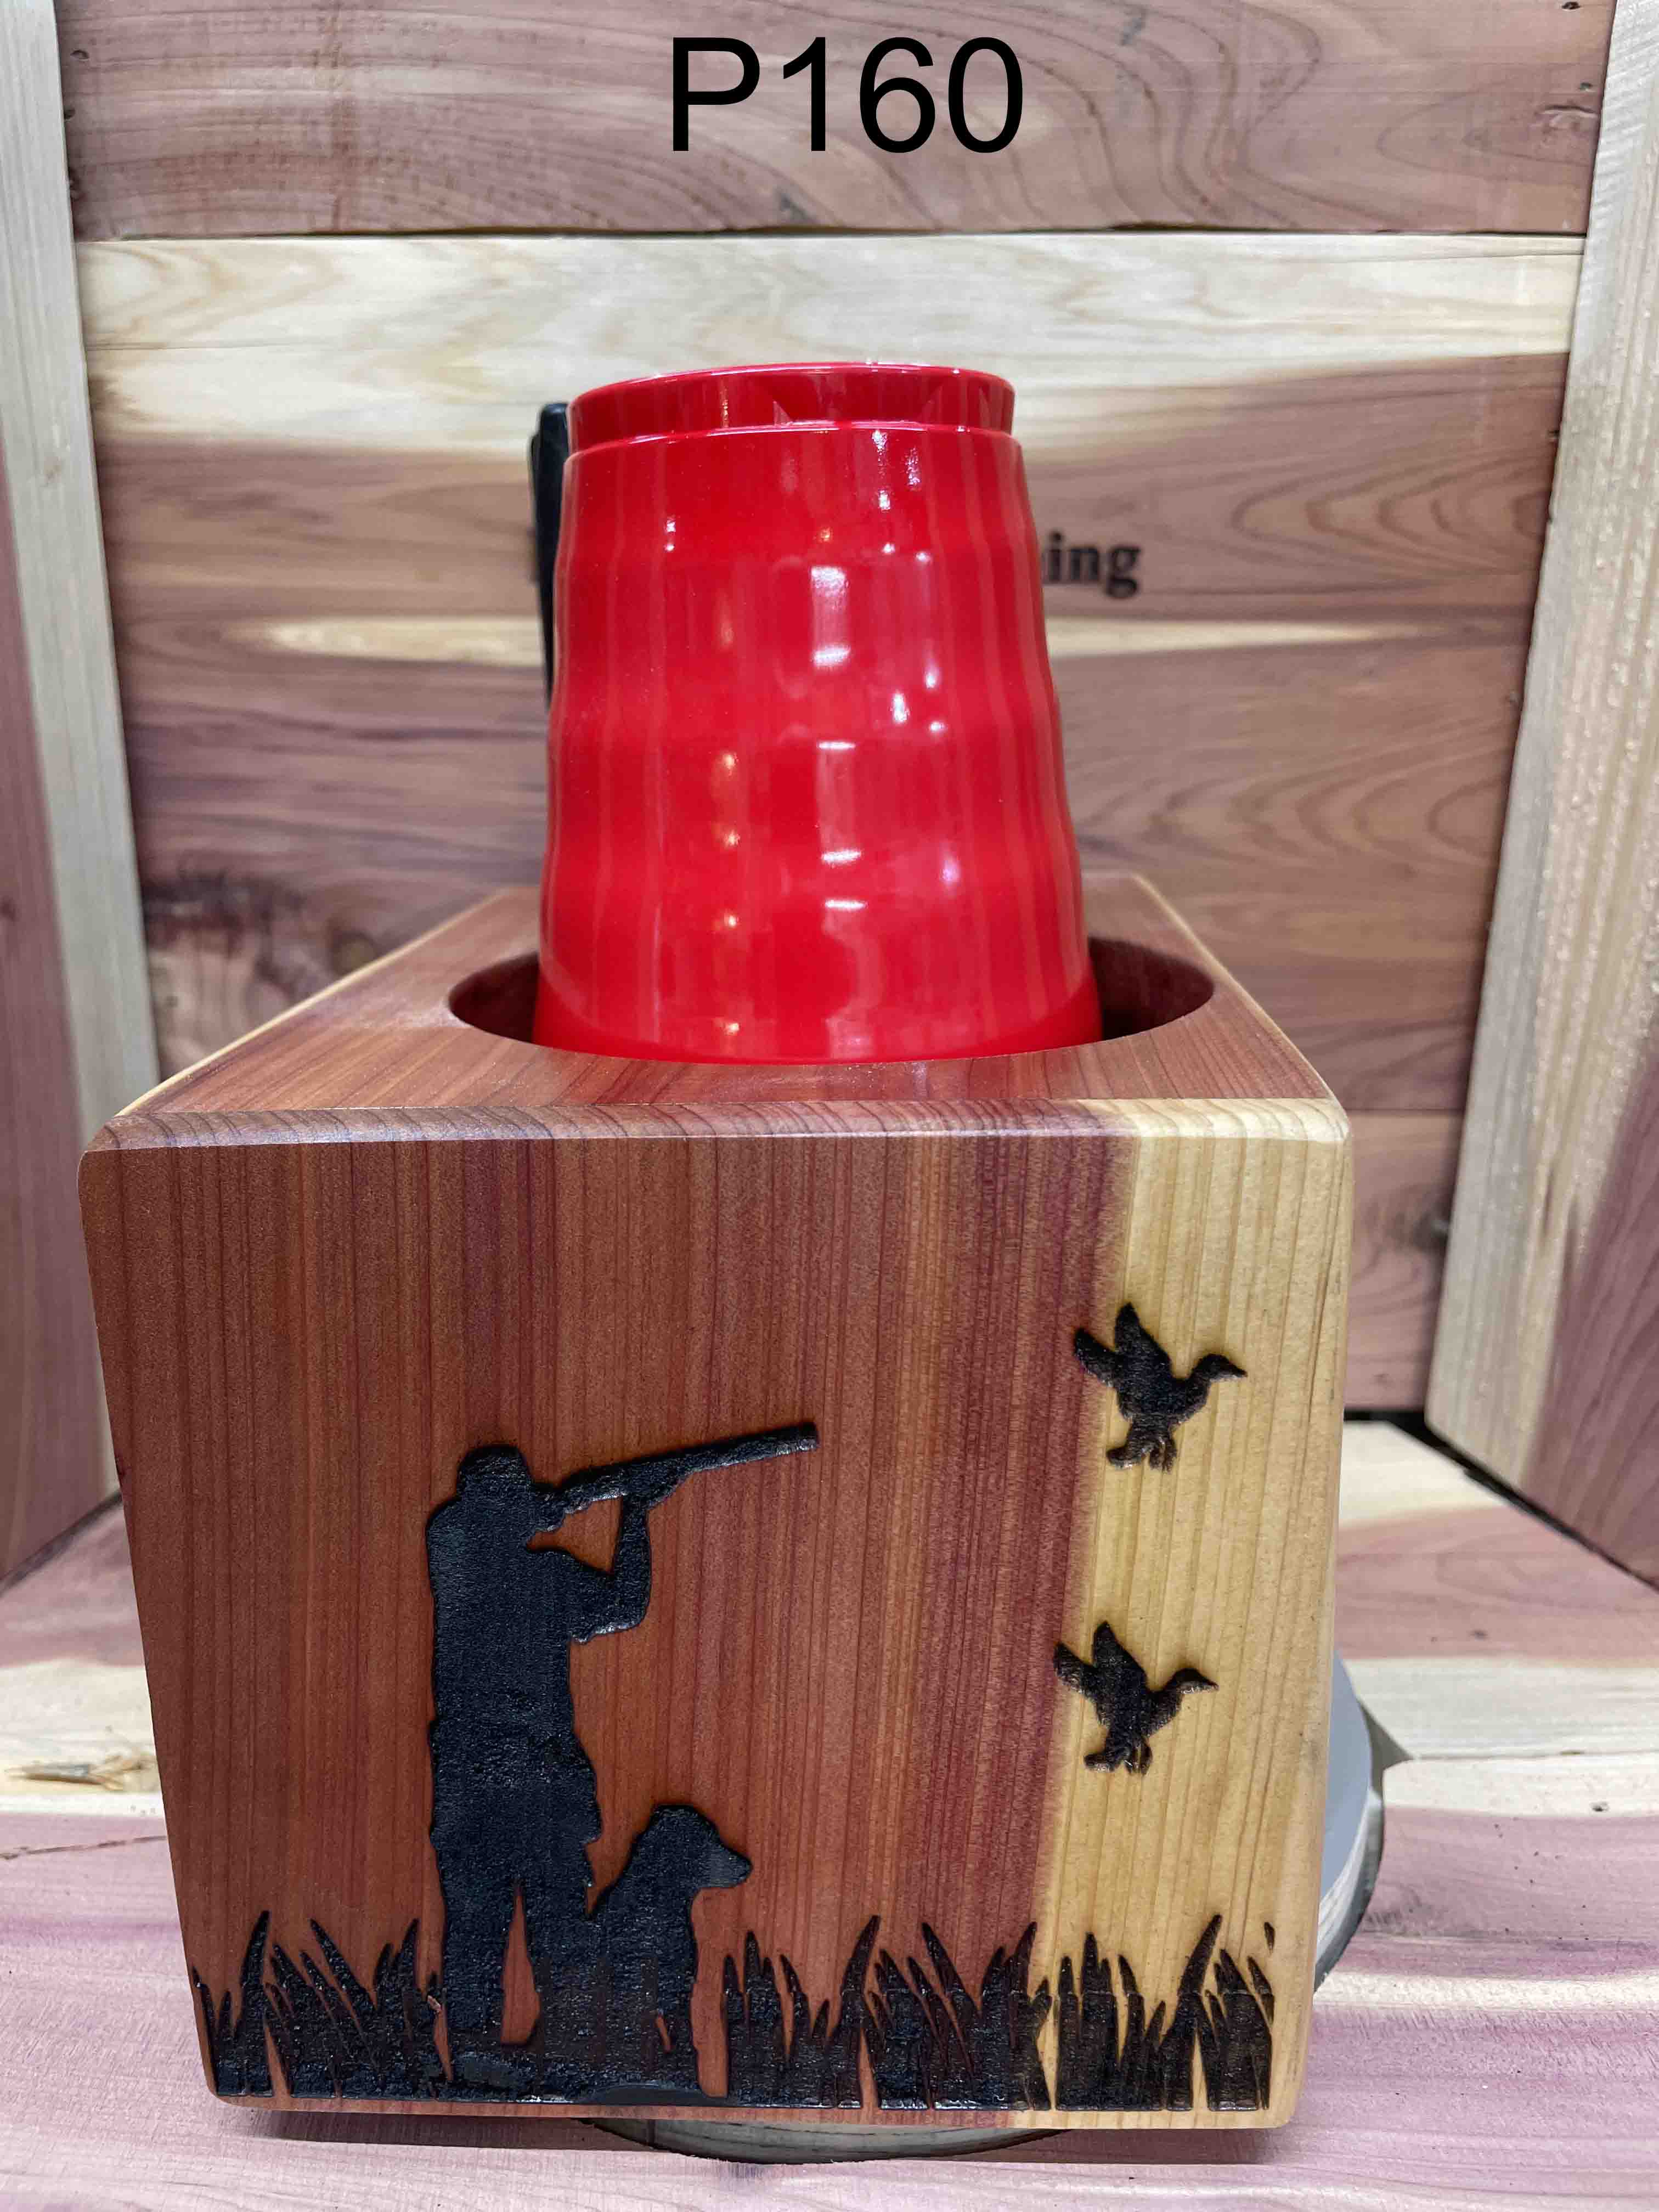 Solo Cup Holder Laser Engraved Red Cedar, "TAKE A CUP & Mark It up" Duck  Pattern"